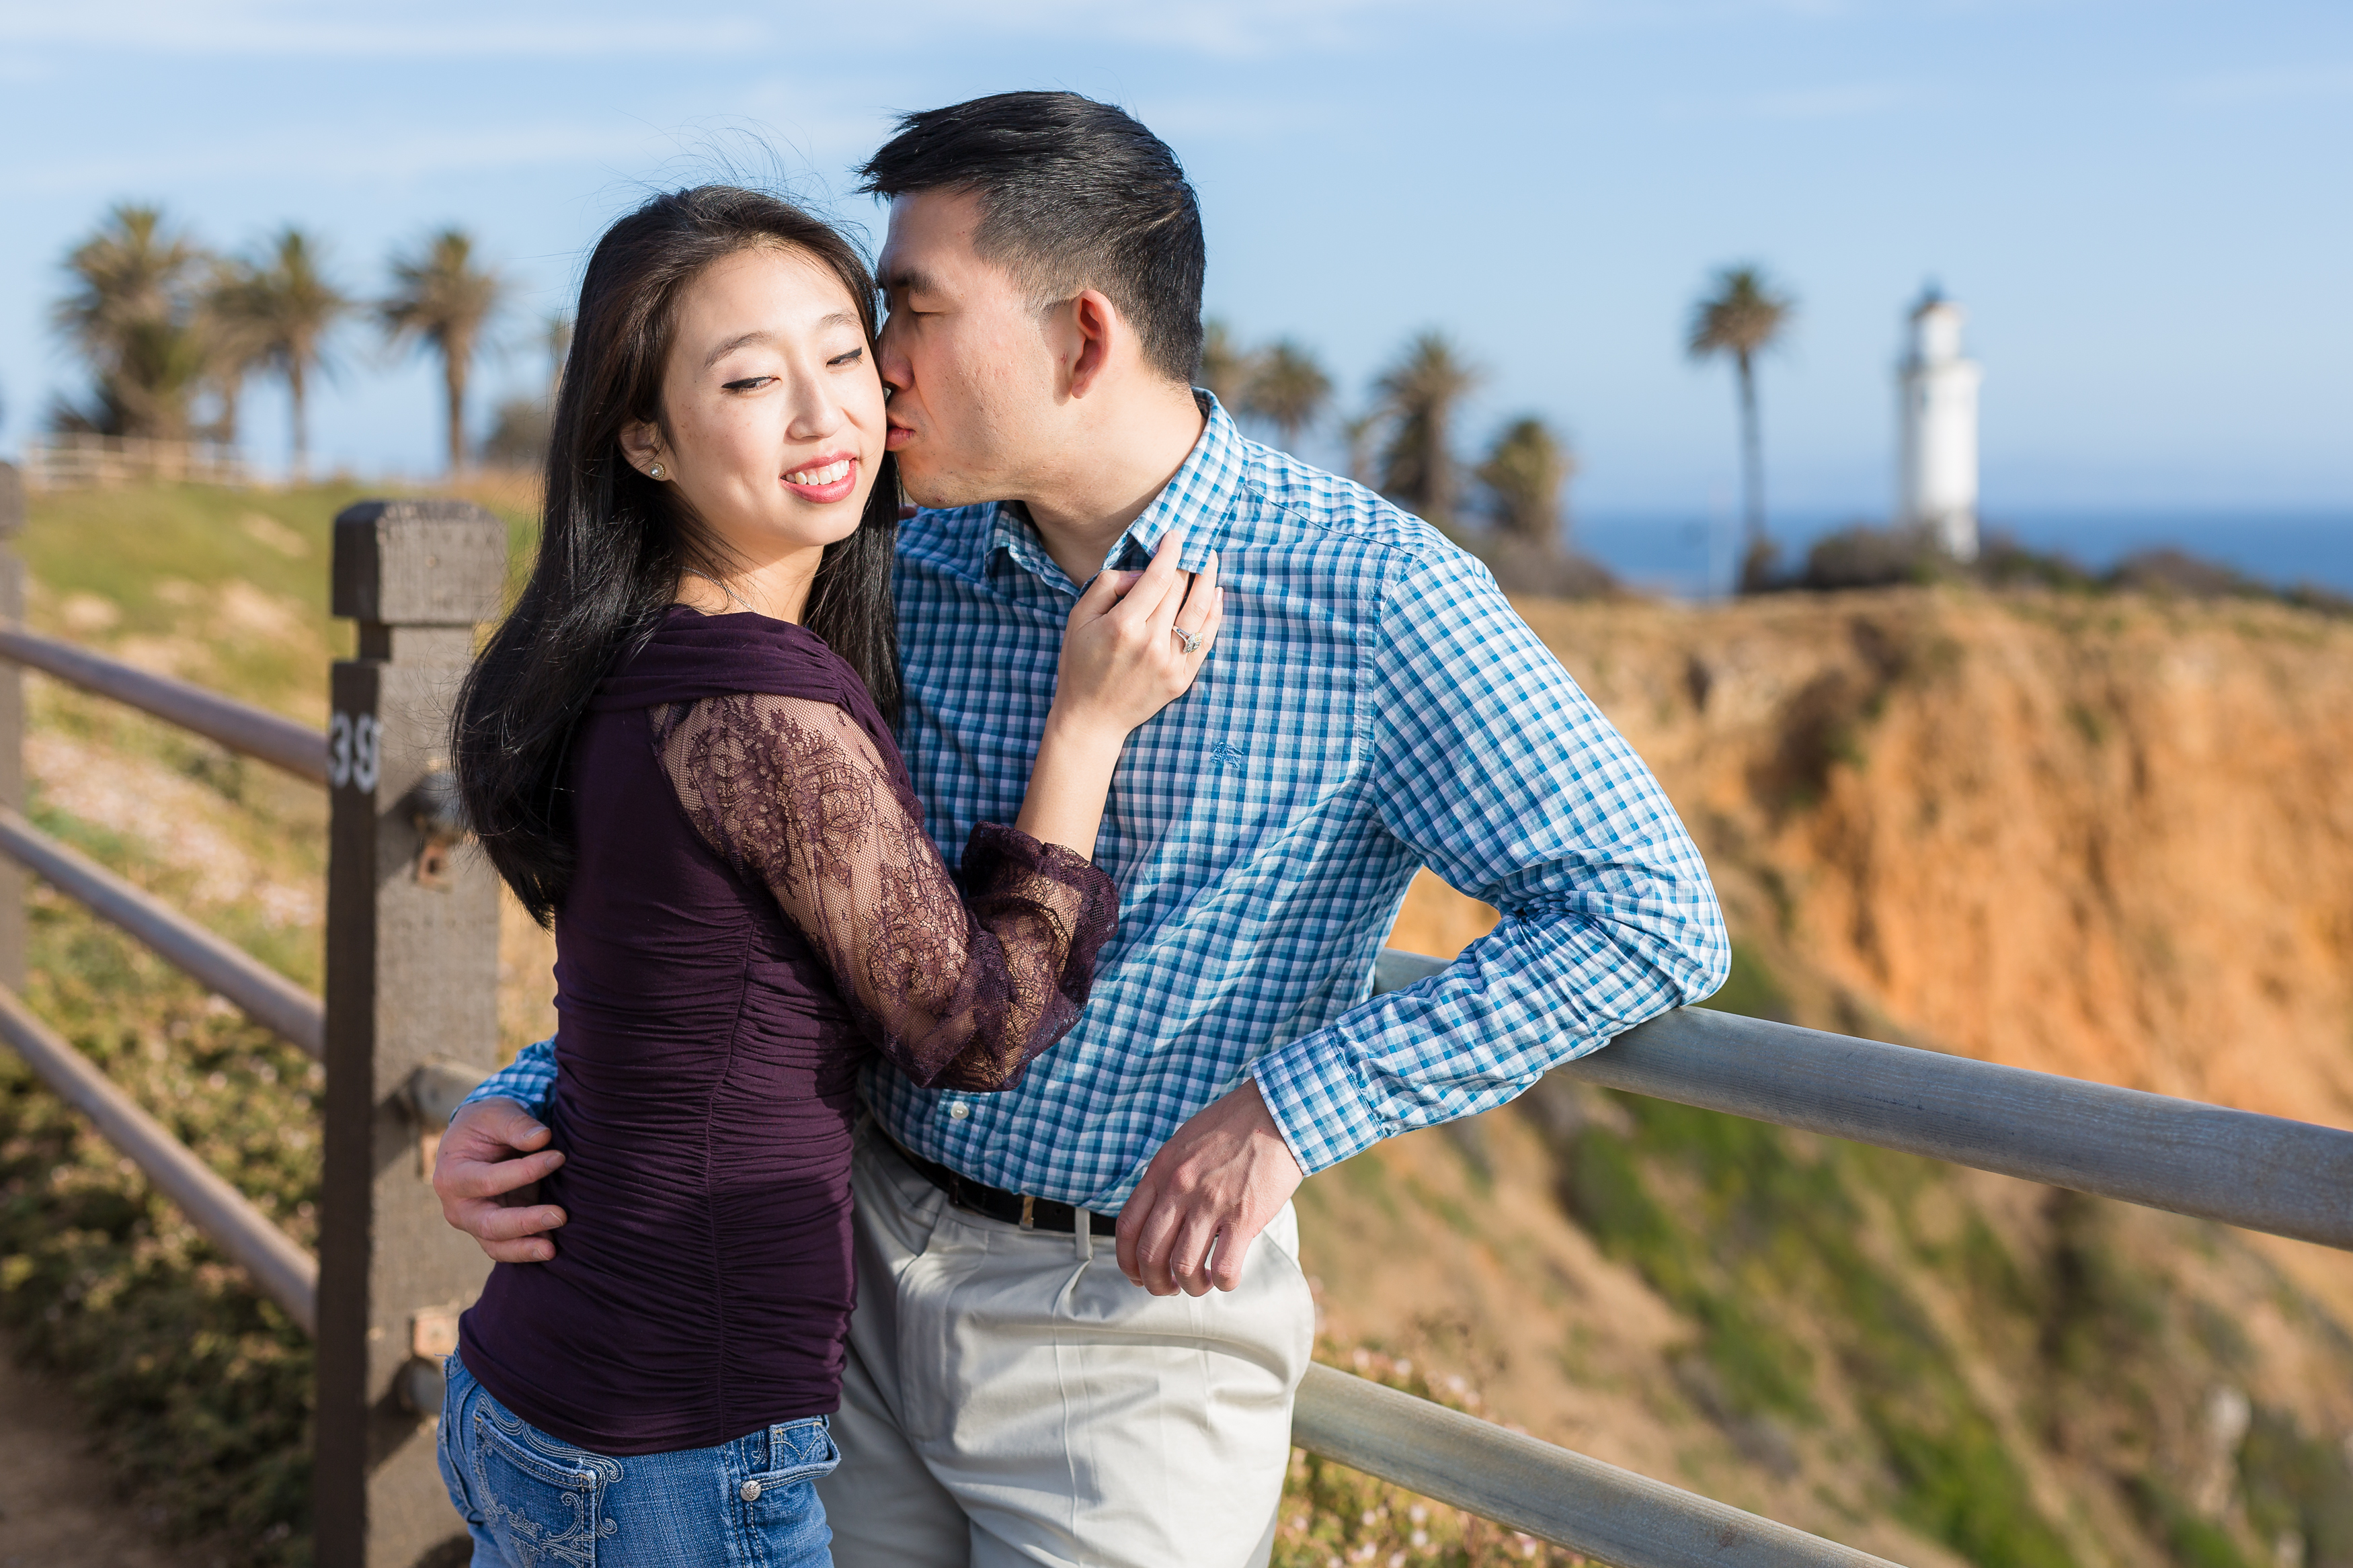 Romantic moment between man and woman during Palos Verdes engagement